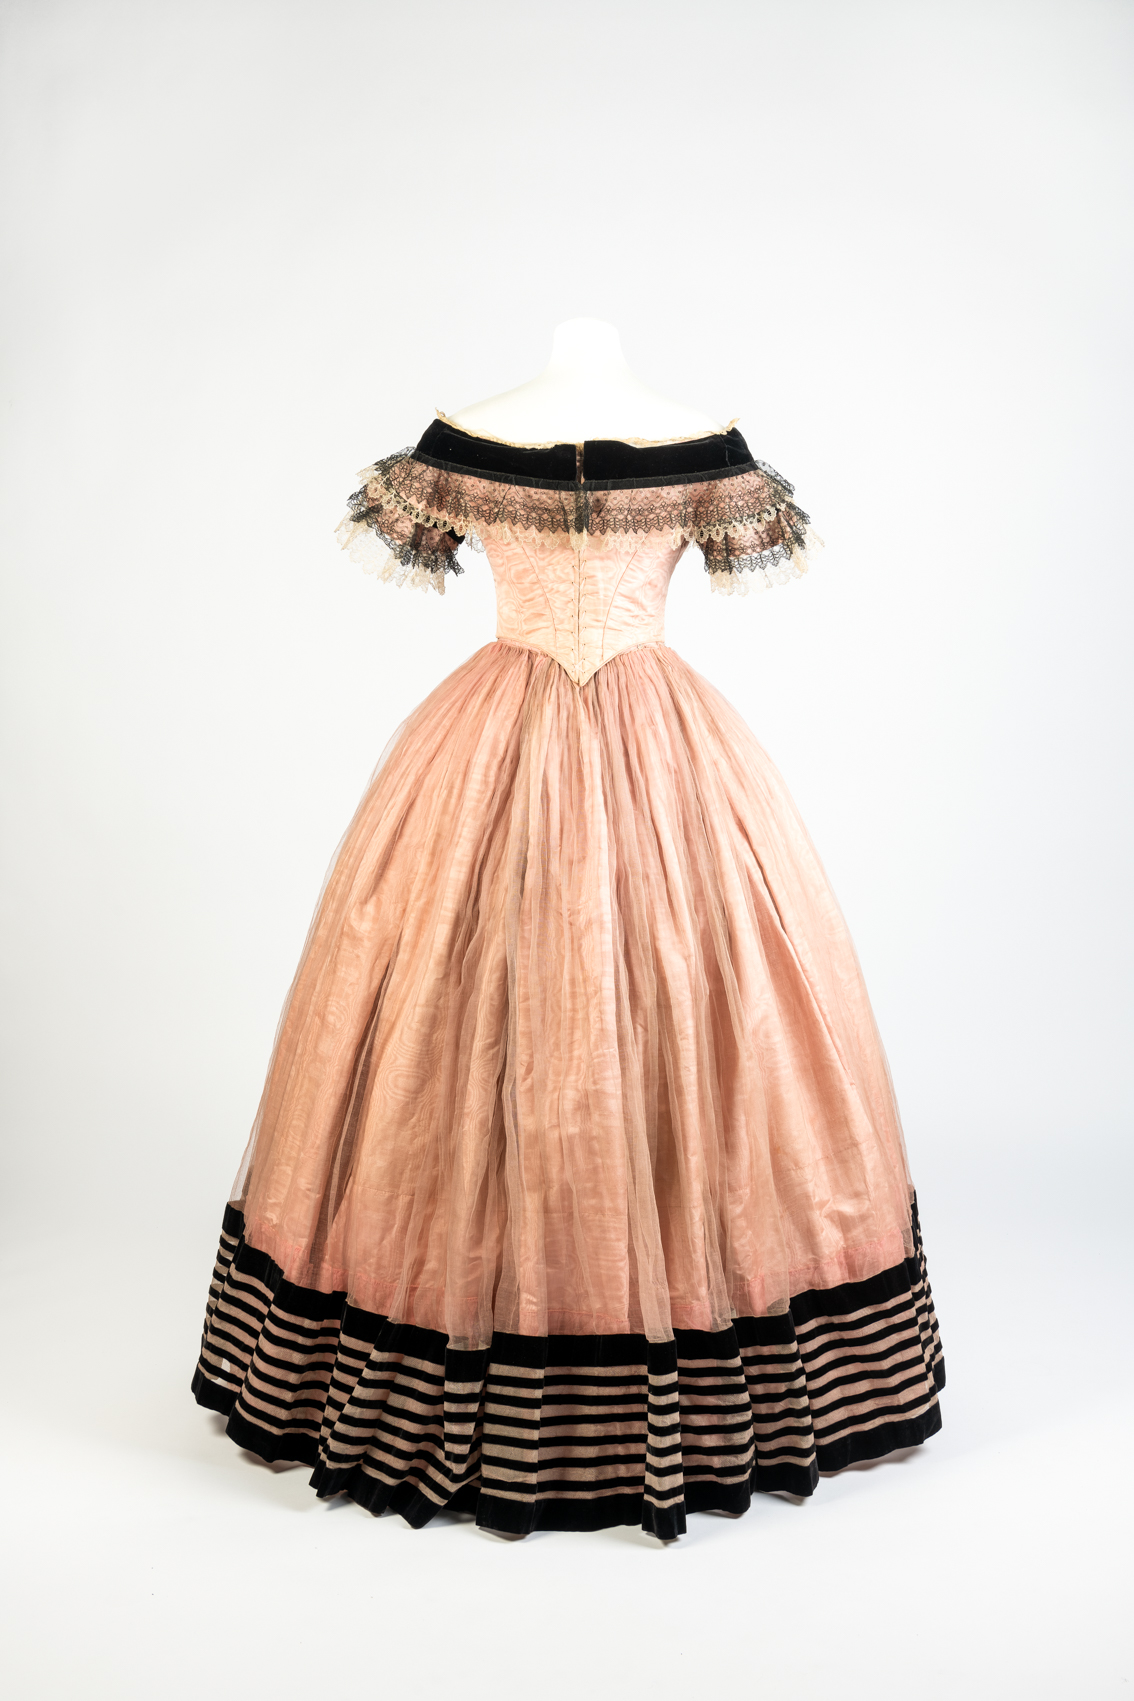 Pink Silk Moire Evening Dress, early 1860s, Fashion Museum Bath